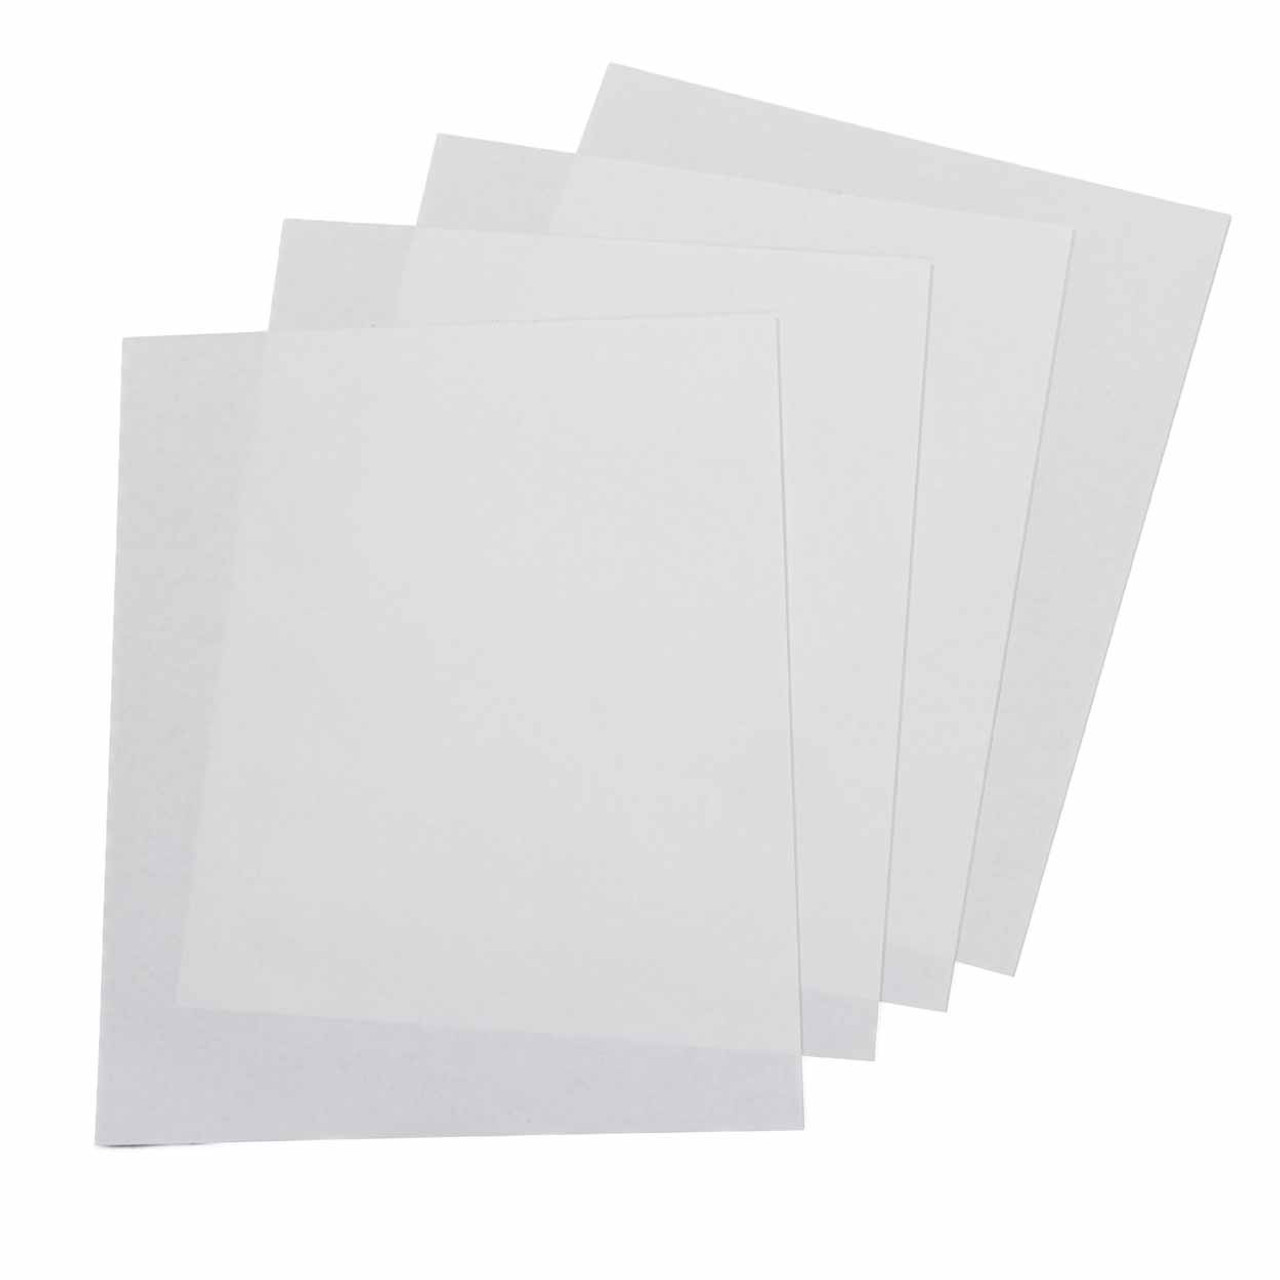 Braille-able Sticky Sheets